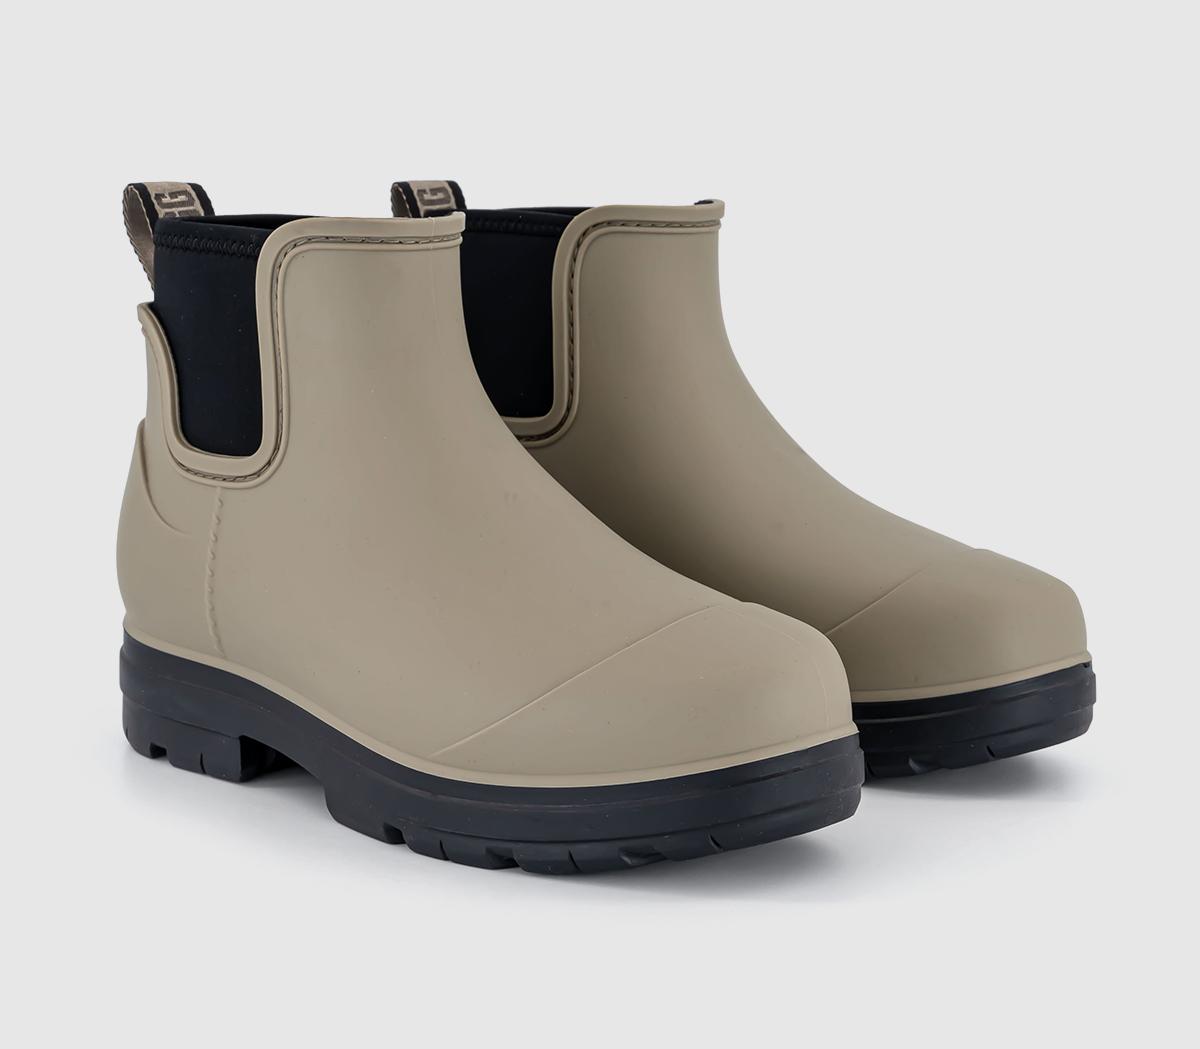 UGG Womens Droplet Rain Boots Taupe Natural, 5